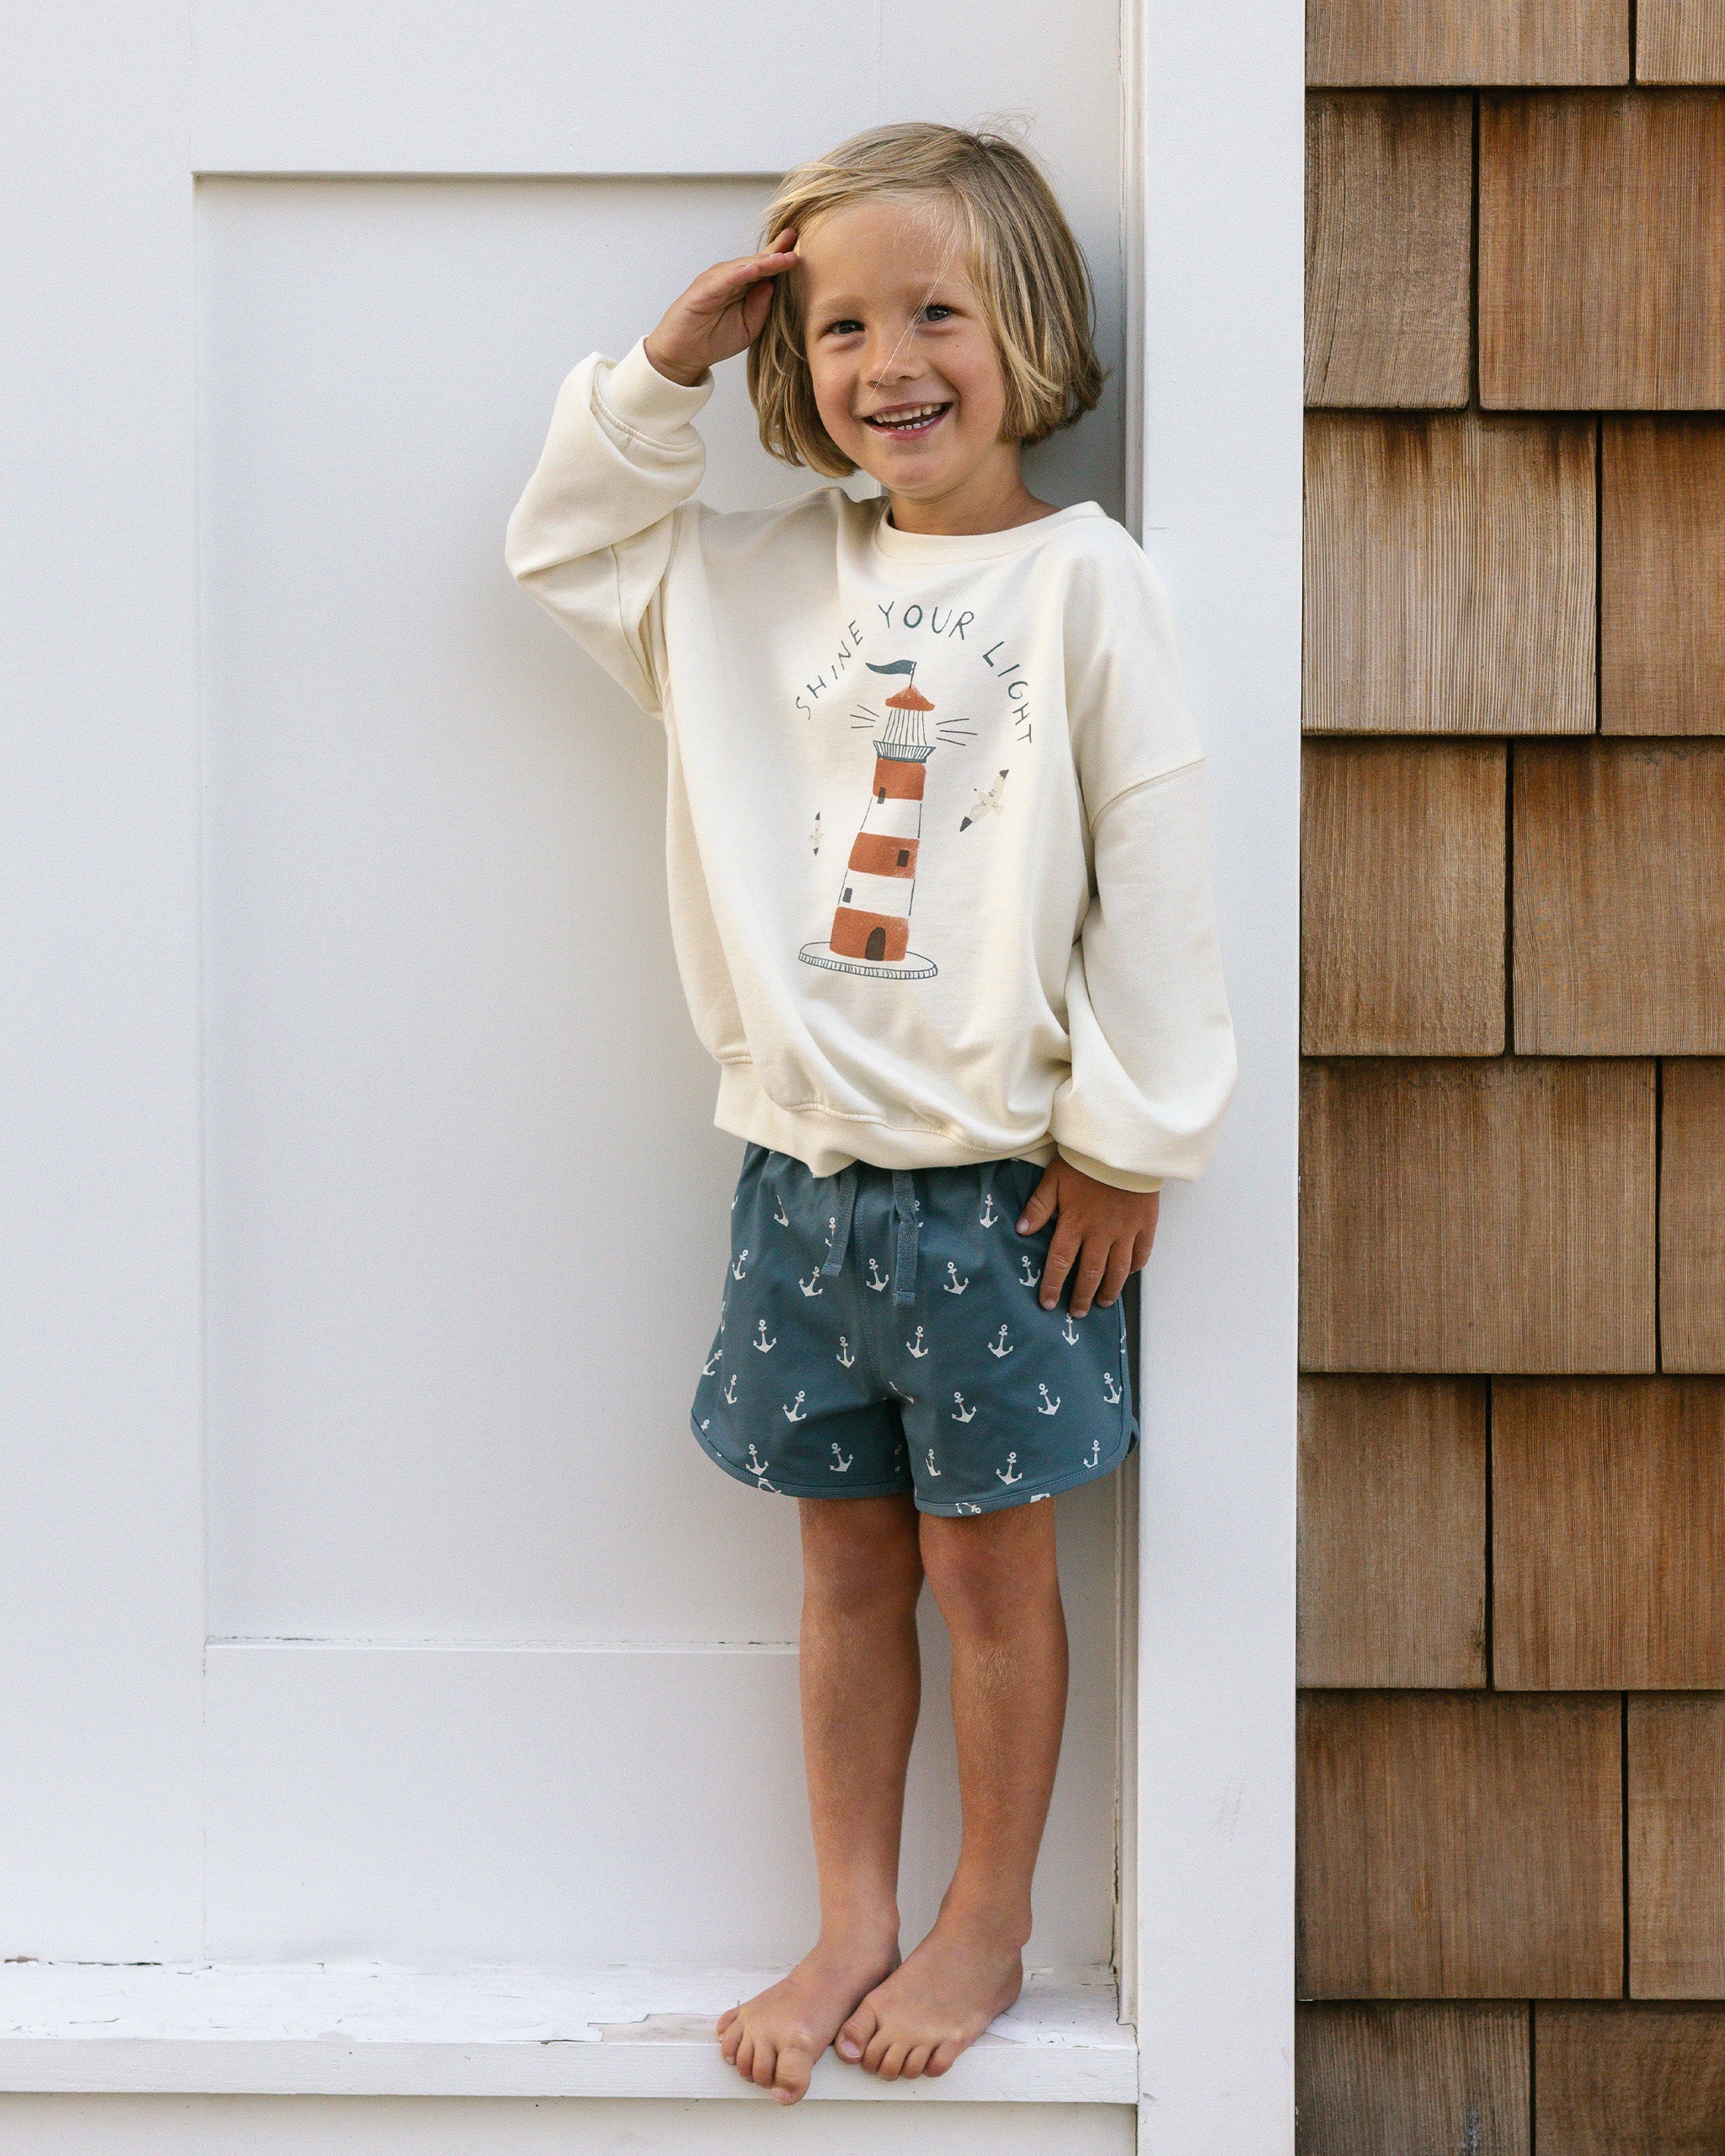 Swim Trunk || Anchors - Rylee + Cru | Kids Clothes | Trendy Baby Clothes | Modern Infant Outfits |